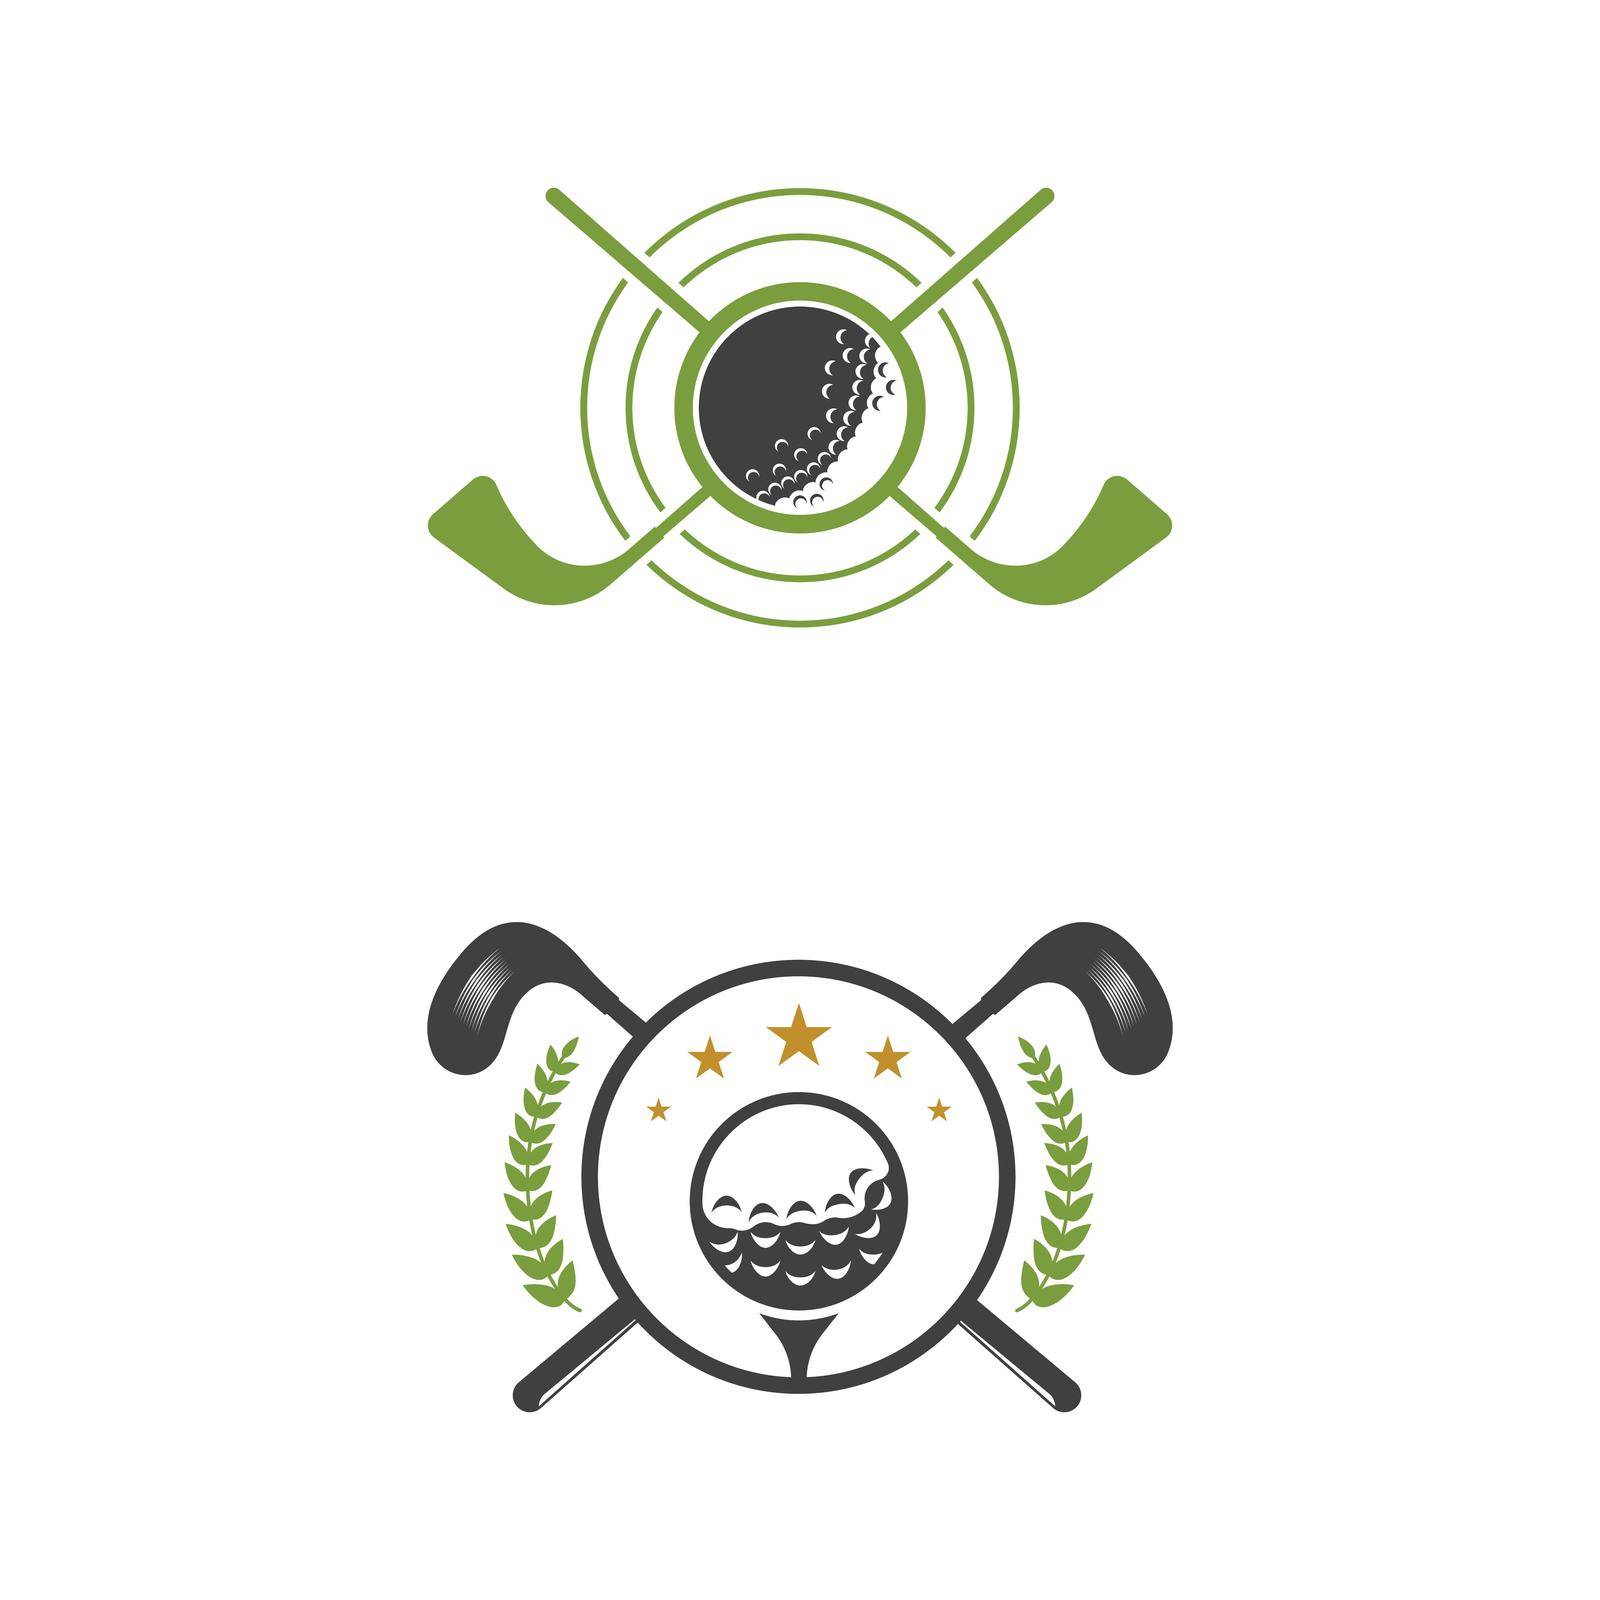 Golf Sport icon Template vector illustration by Elaelo